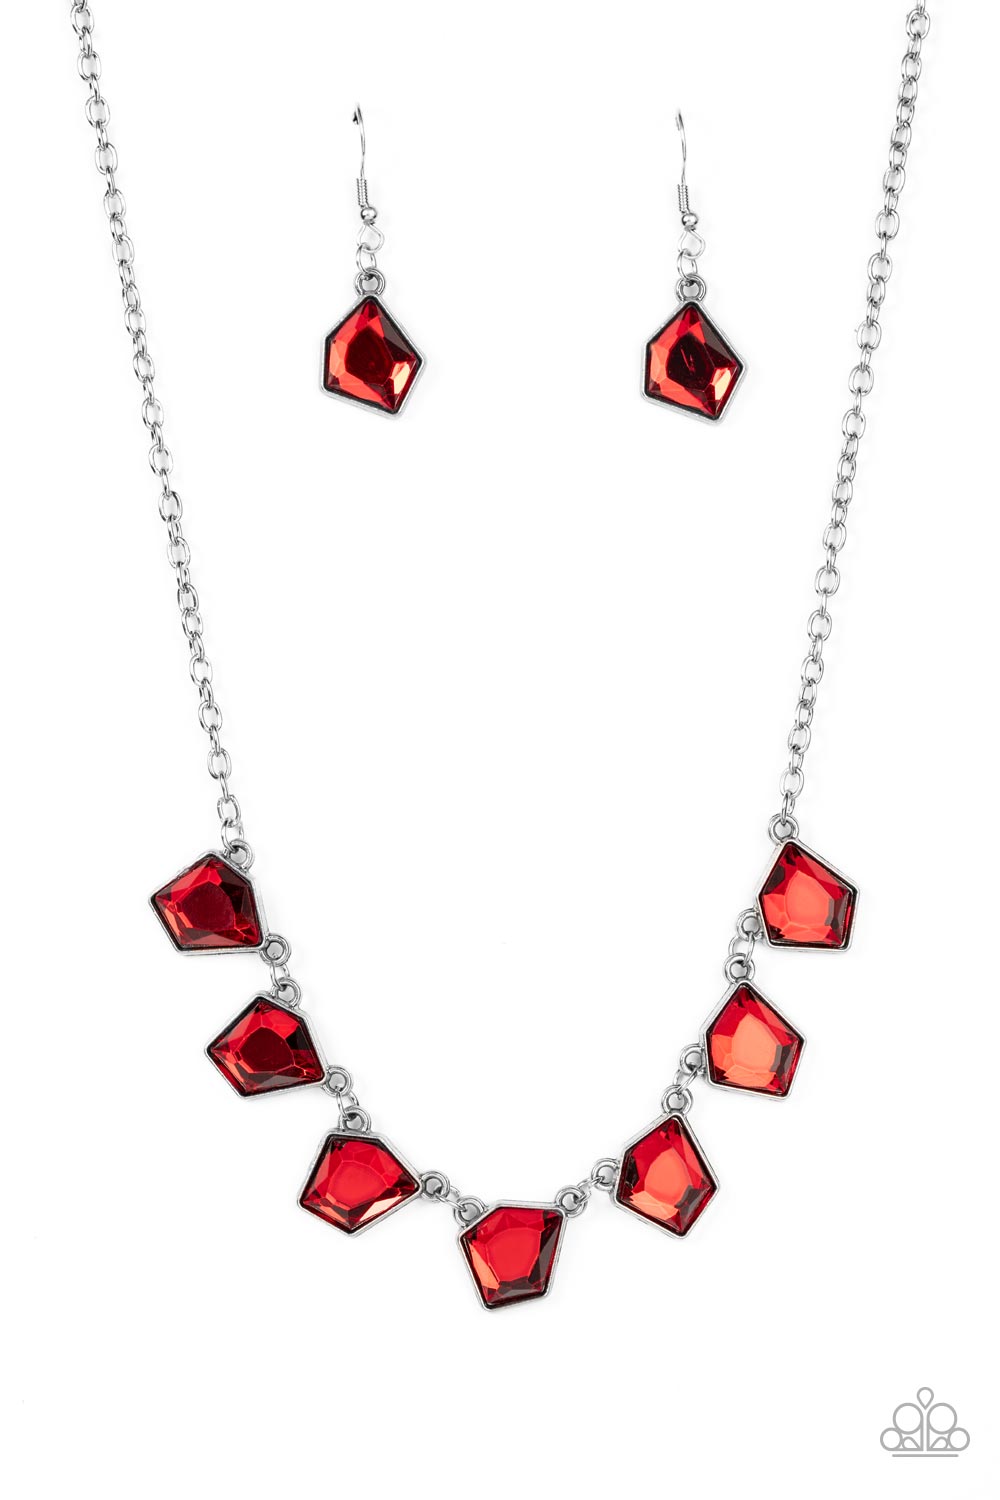 Experimental Edge Red Necklace - Paparazzi Accessories  Featuring a fiery red finish, imperfect geometric gems delicately link below the collar for an edgy pop of glitz. Features an adjustable clasp closure.  Sold as one individual necklace. Includes one pair of matching earrings.